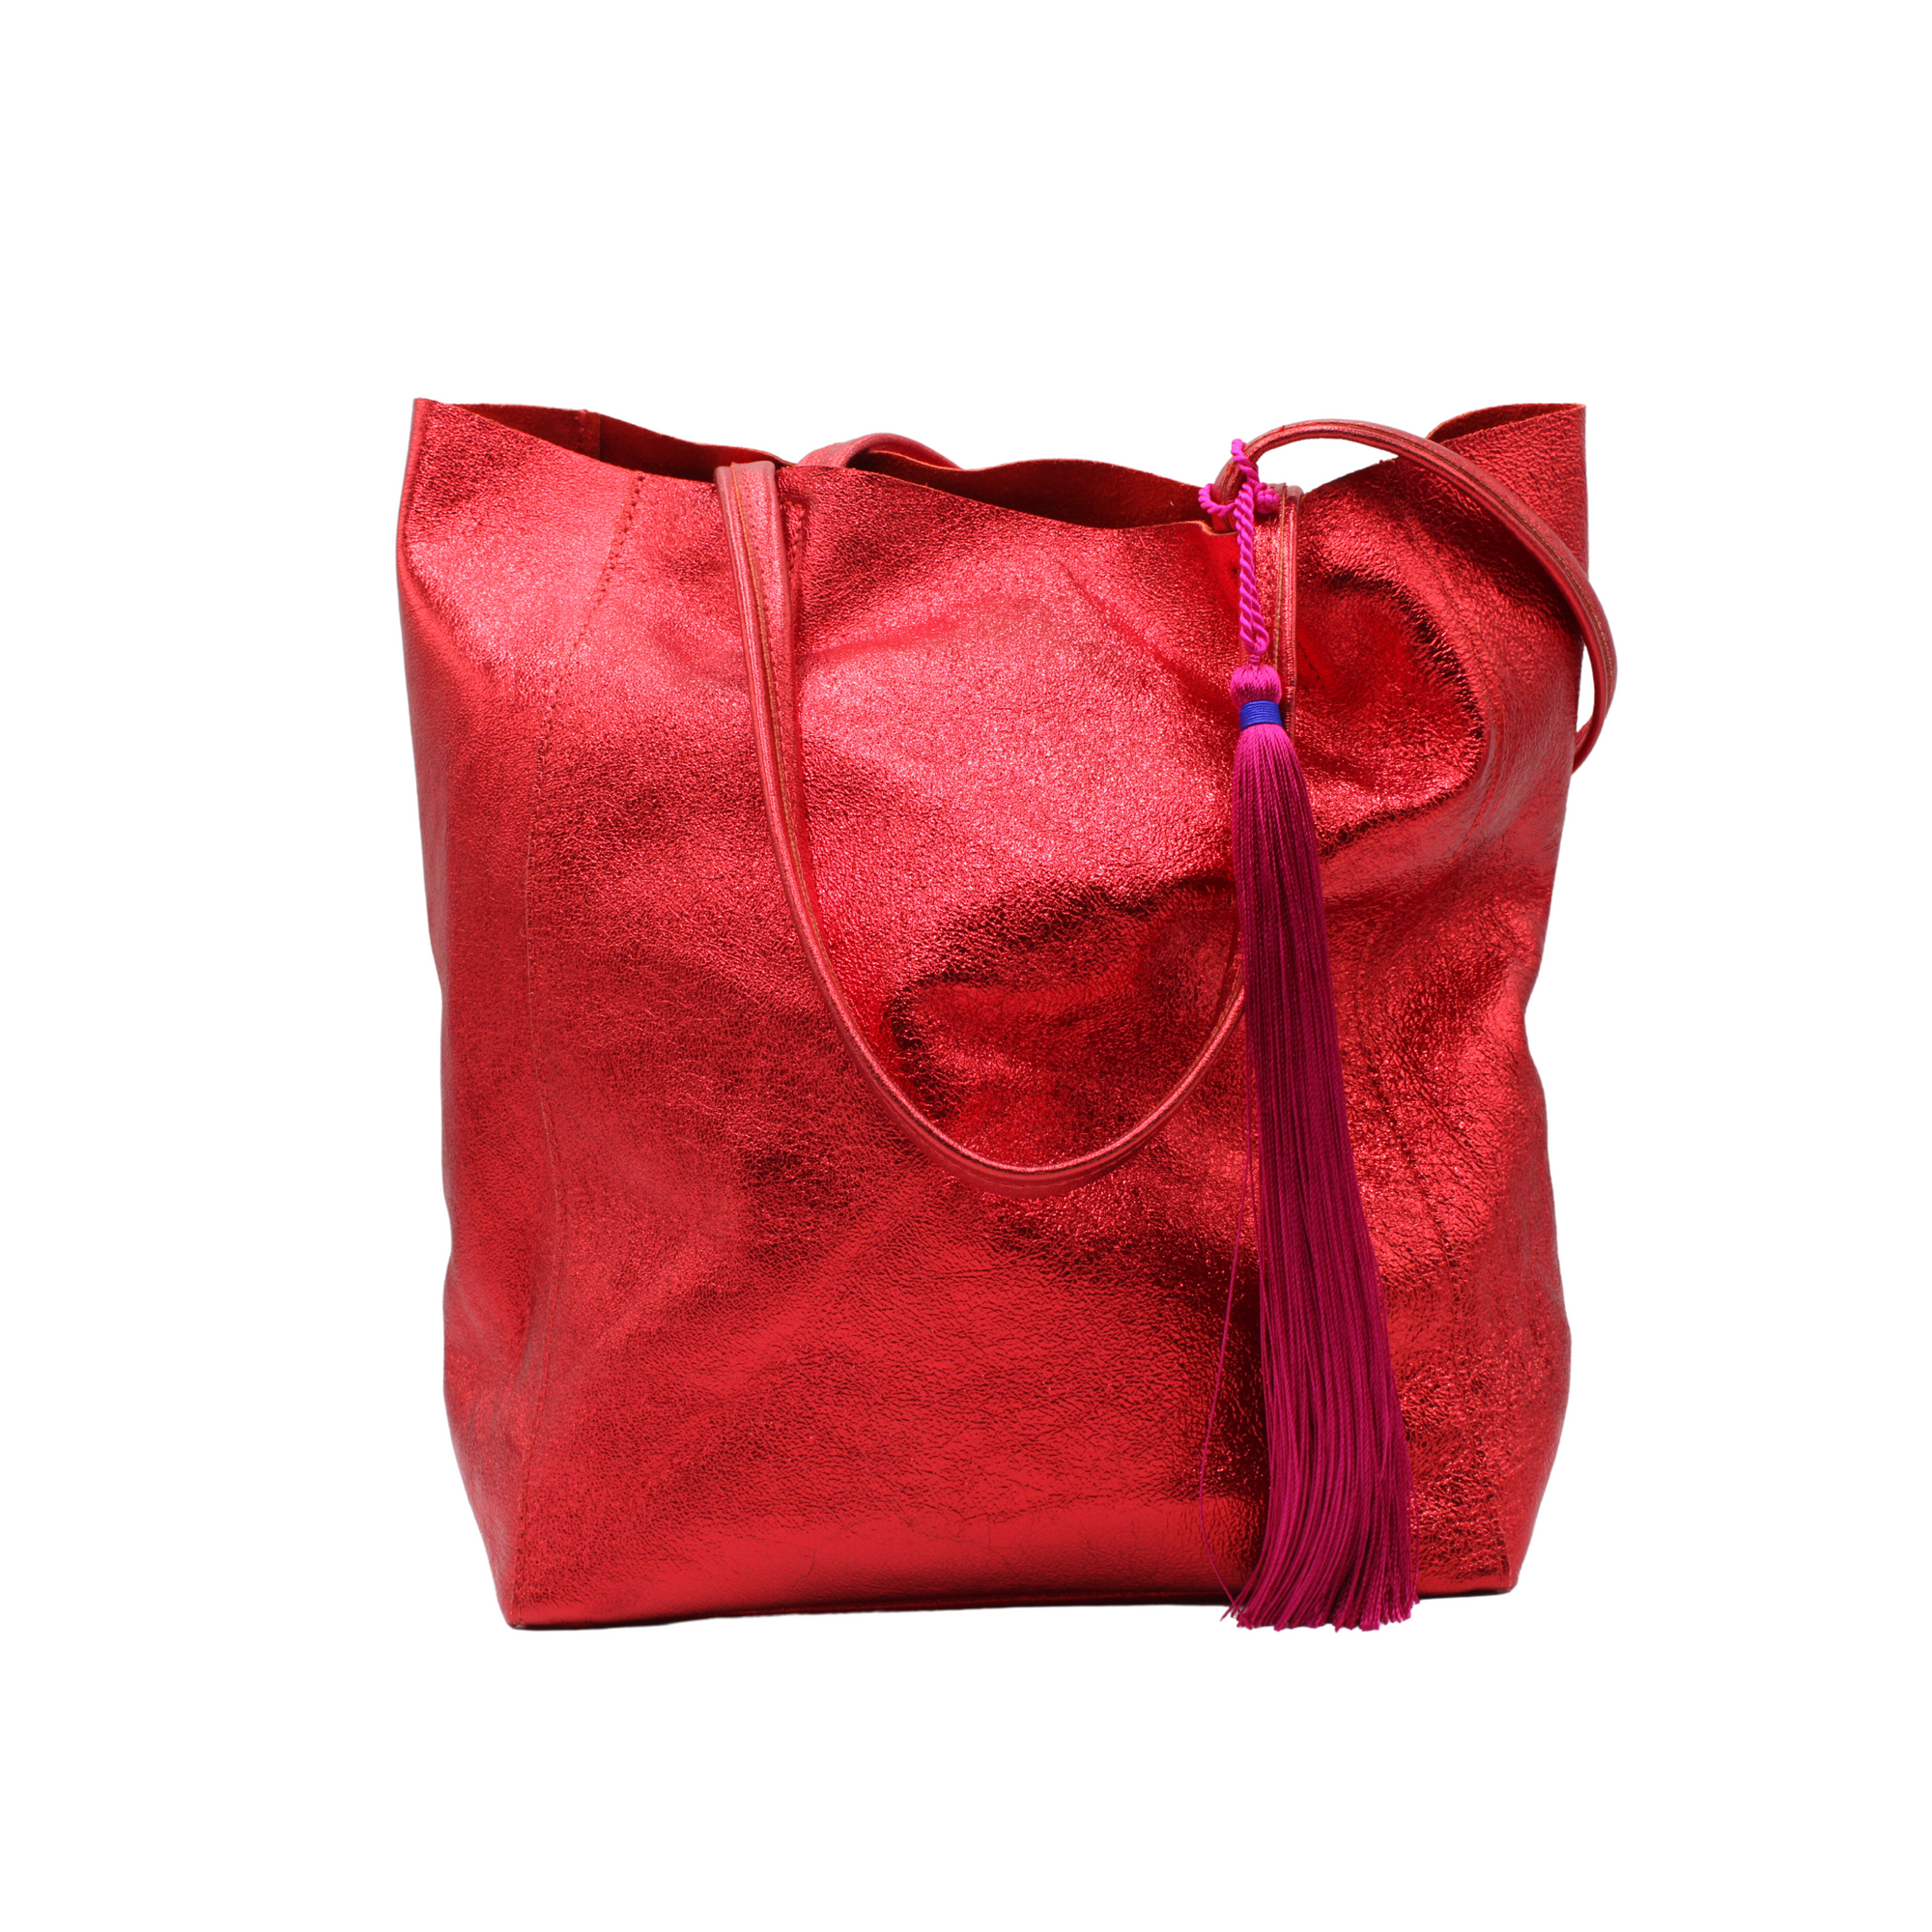 The 'Bessie' Italian Leather Shopper in Spectacular Racy Red